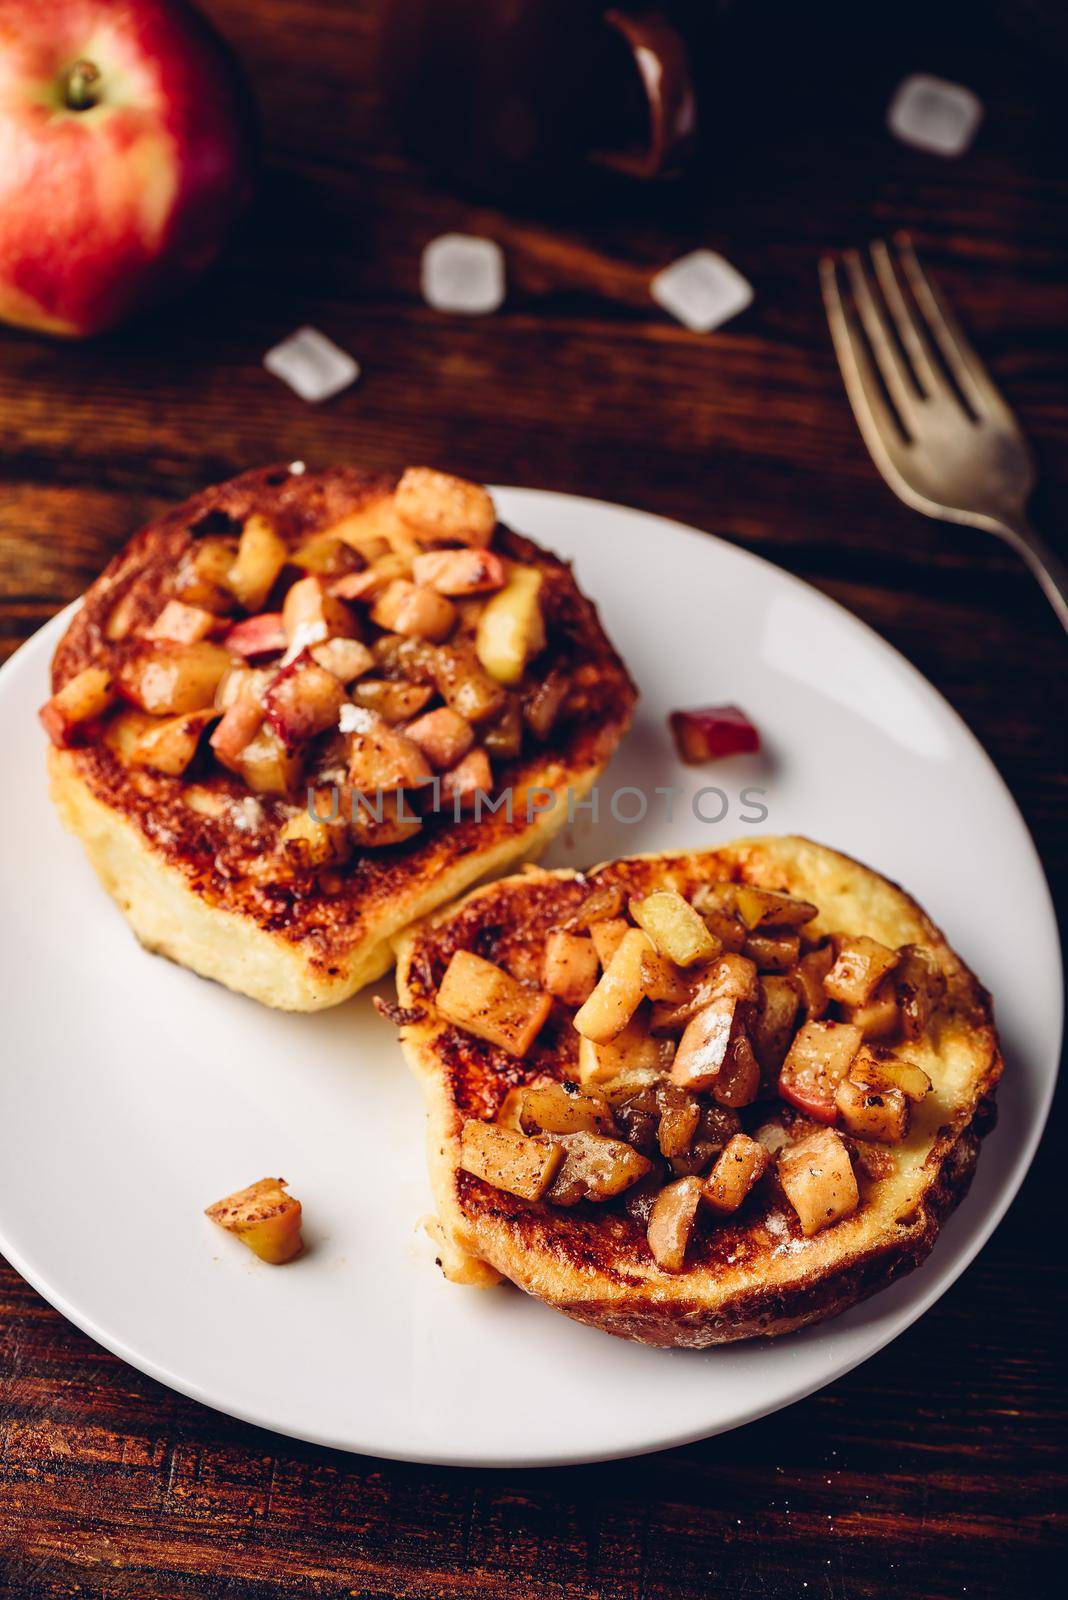 French toasts with chopped apple caramelized with cinnamon